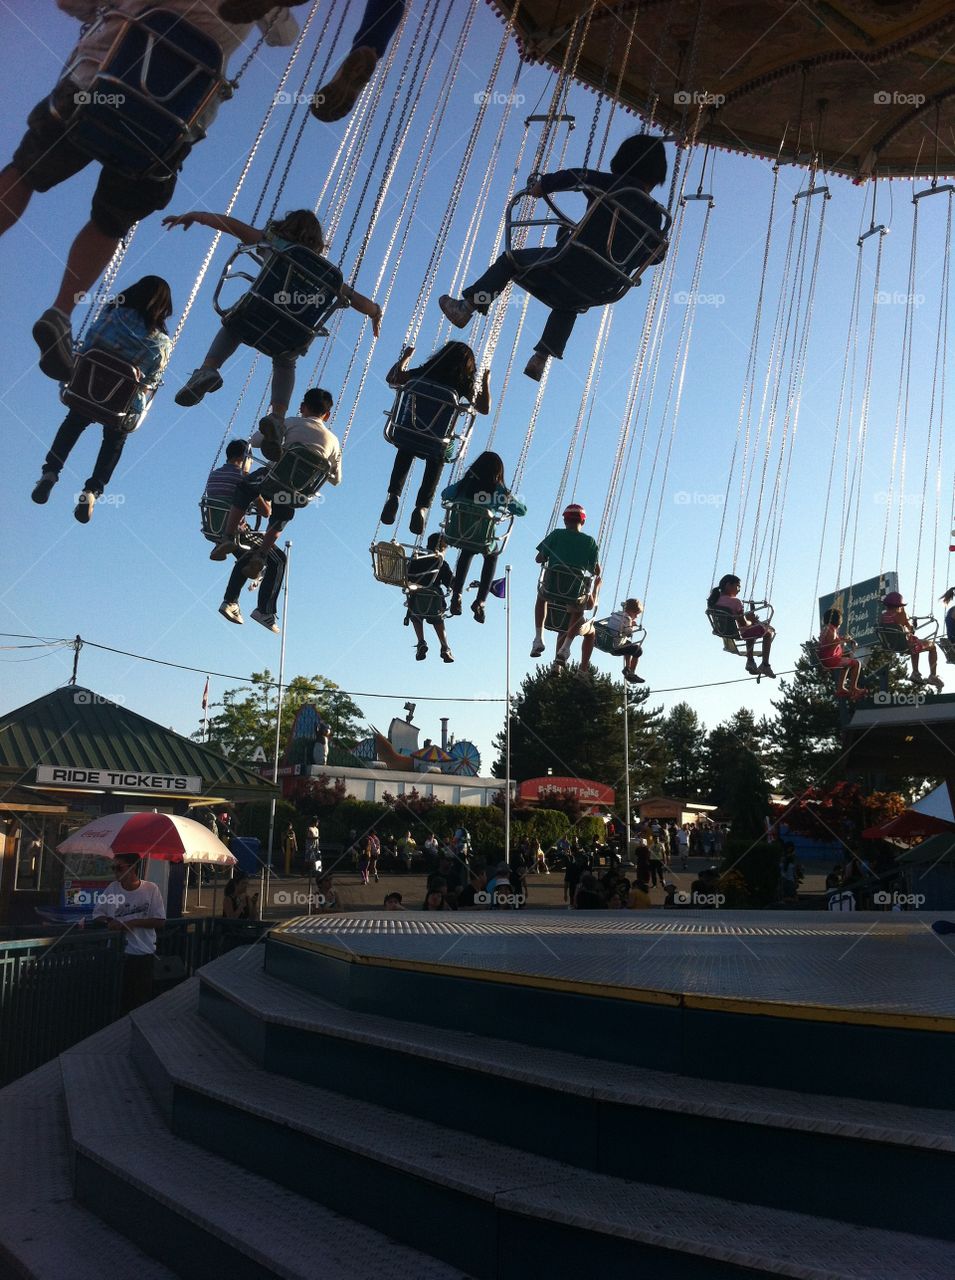 The fair at the PNE